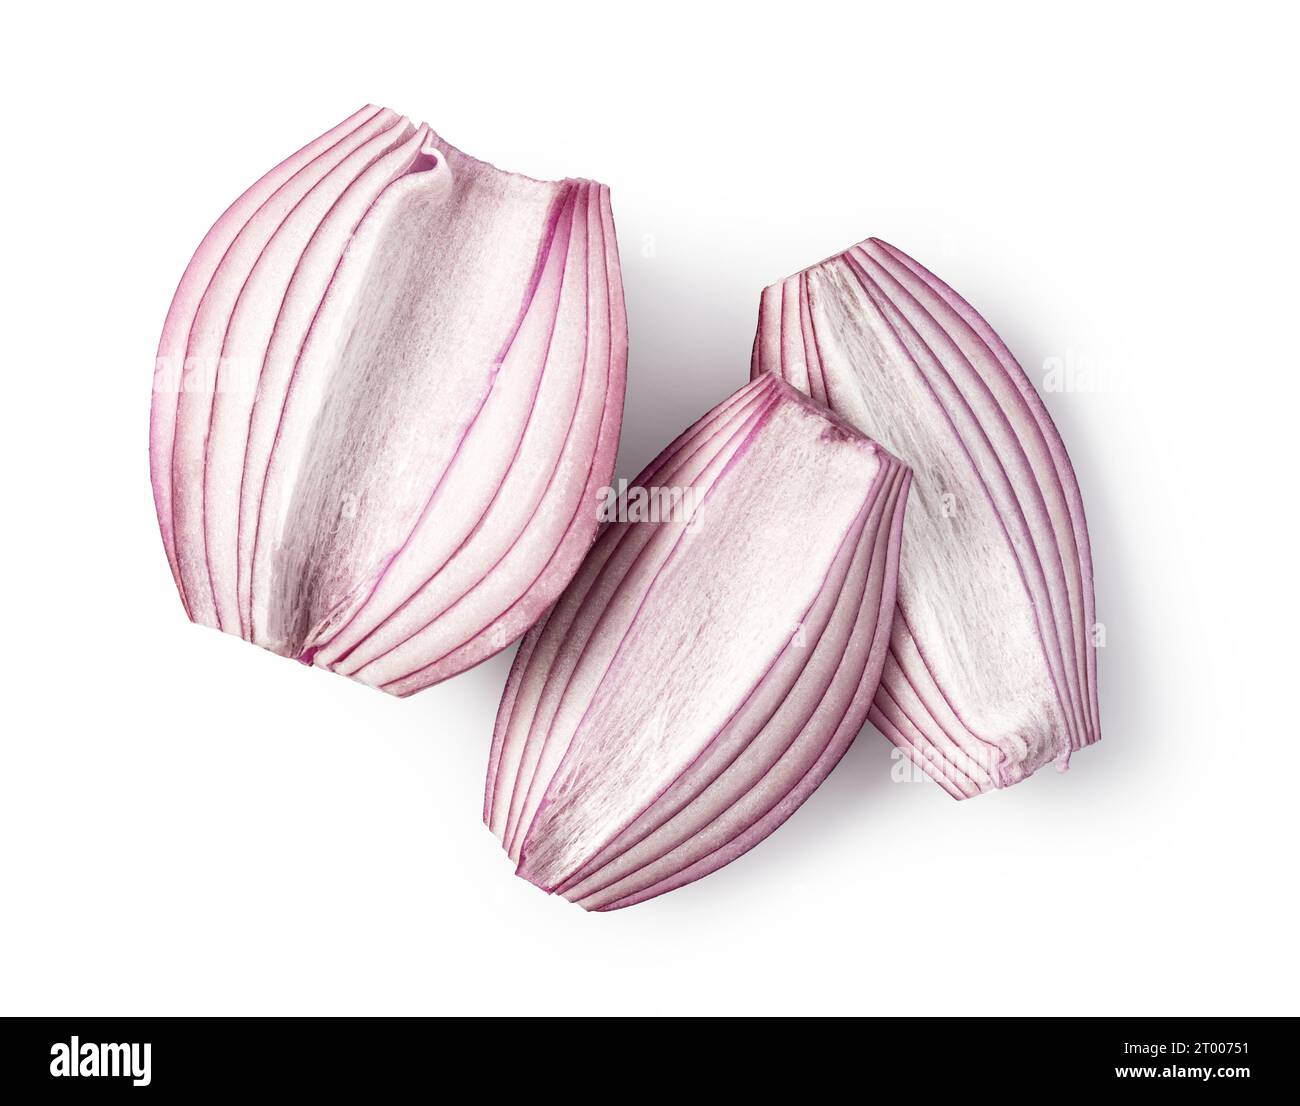 Sliced red onion ring Stock Photo